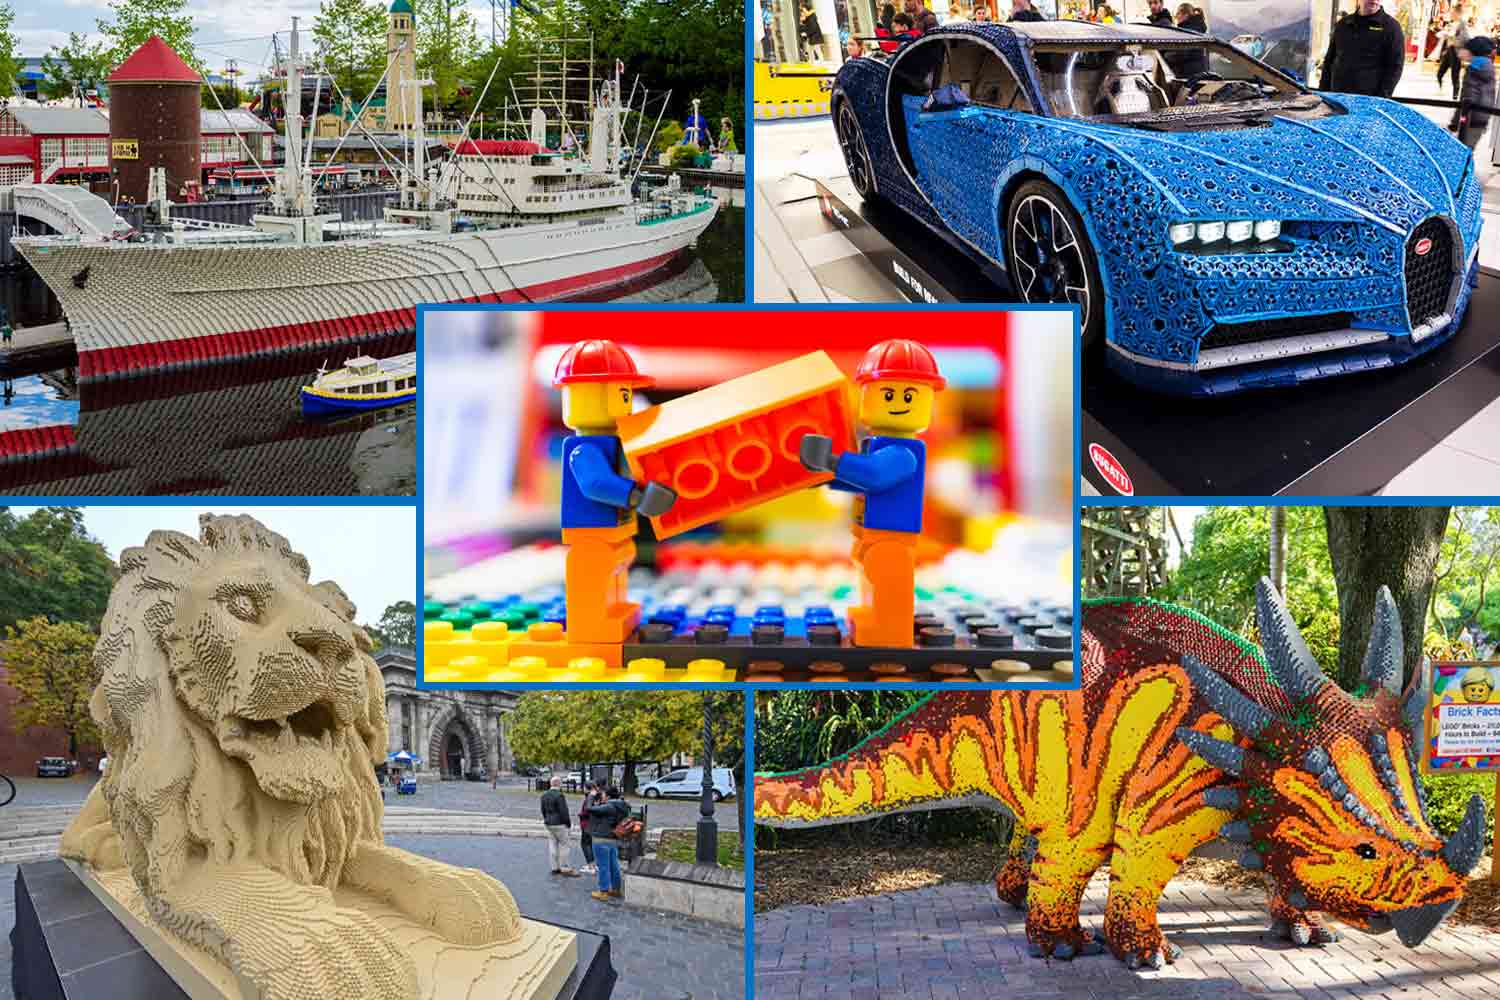 A boat, a car, a lion, and a stegosaurus, all built with LEGO, along with two LEGO people carrying a LEGO brick.